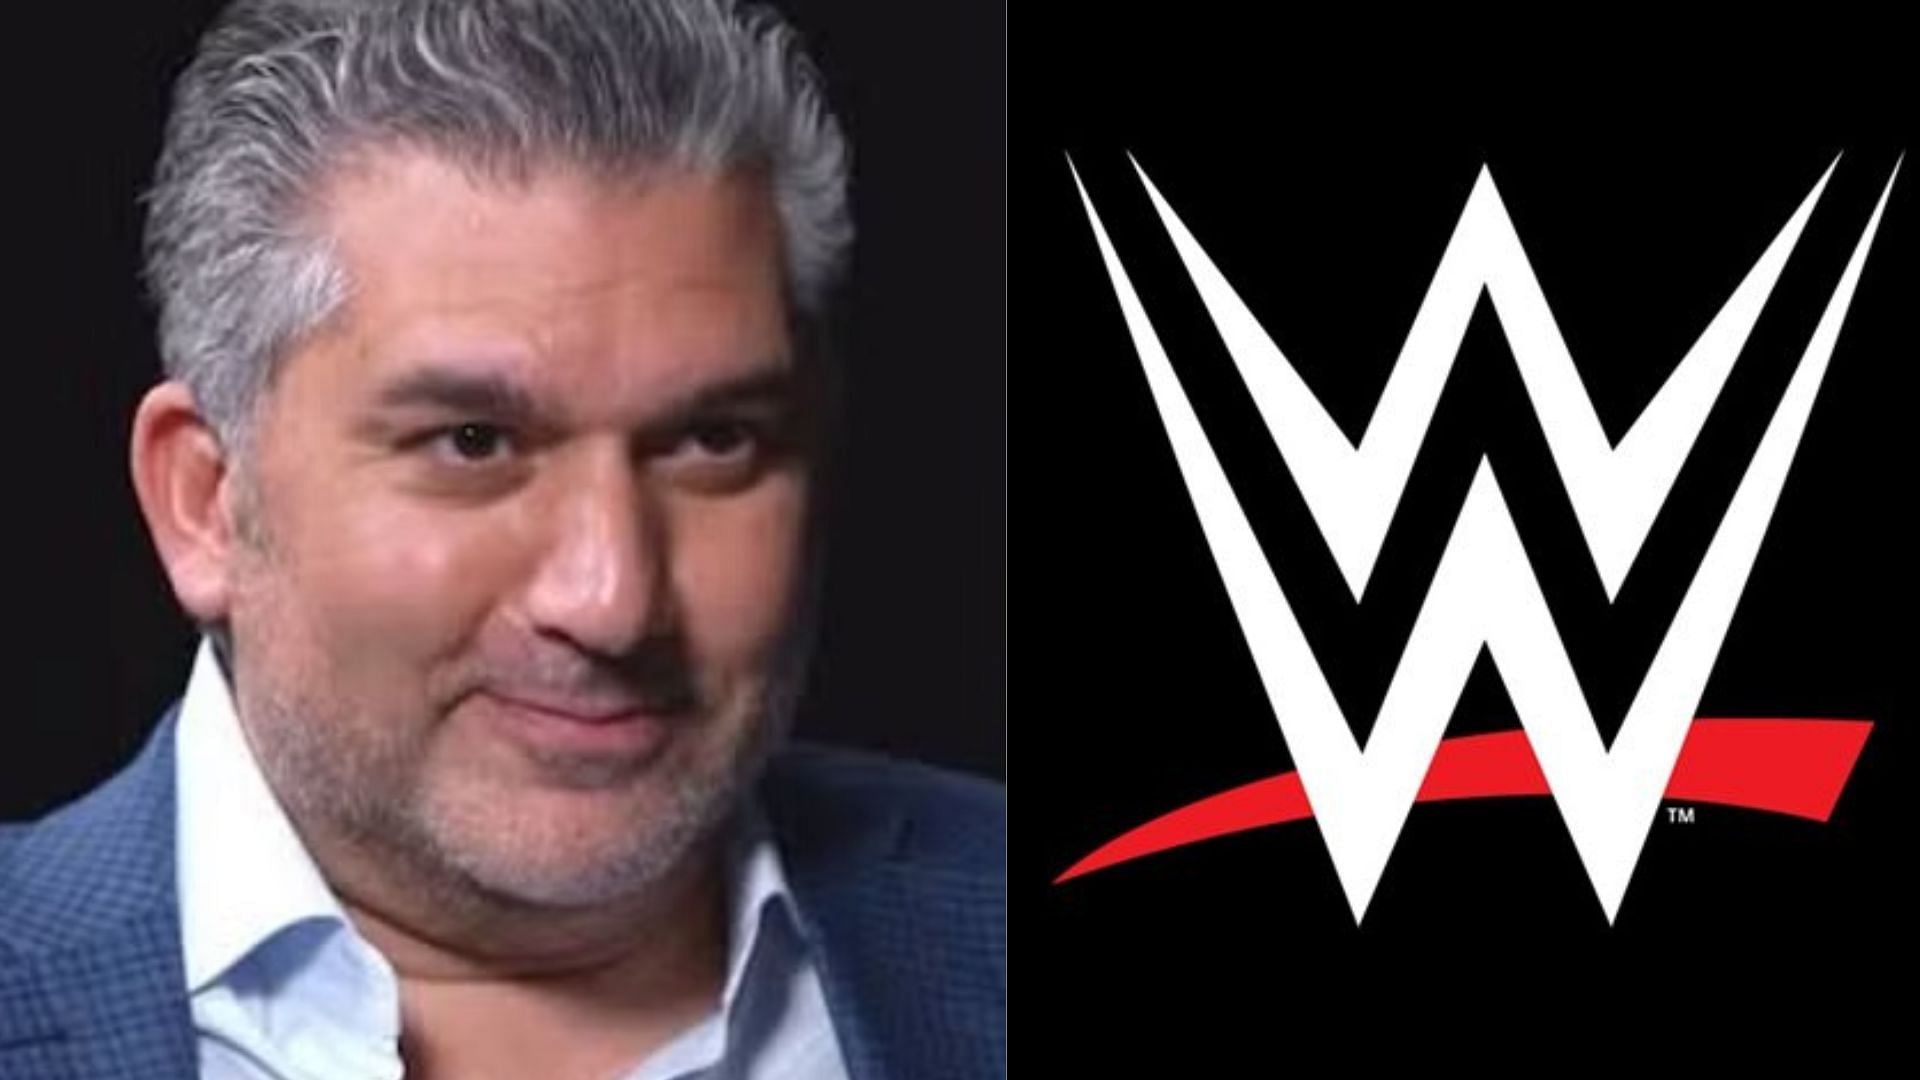 "There's plenty of money out there for us" - Nick Khan claims WWE is in a good position ahead of media rights negotiations